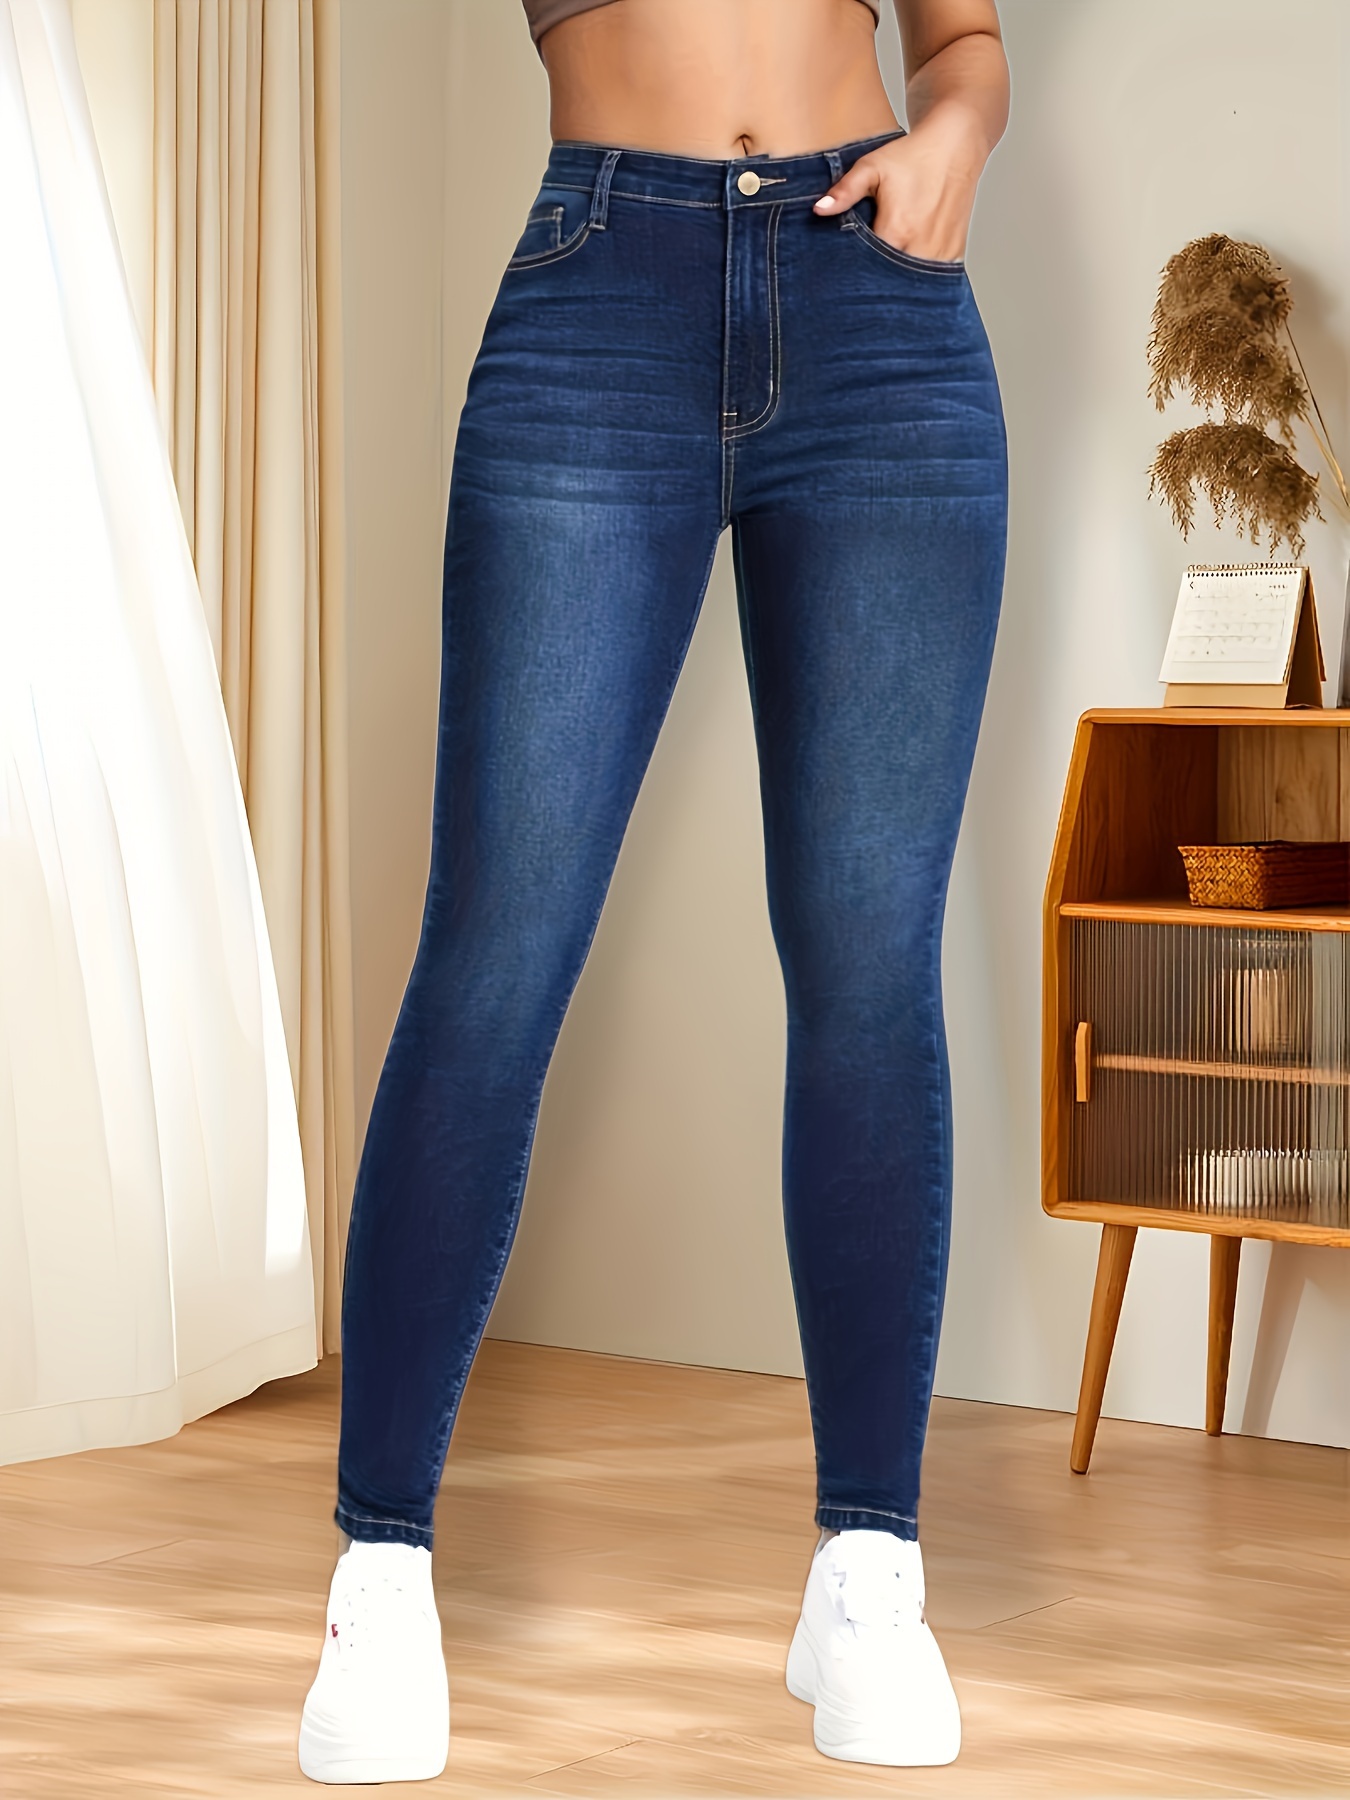 Womens Jeans with Deep Pockets